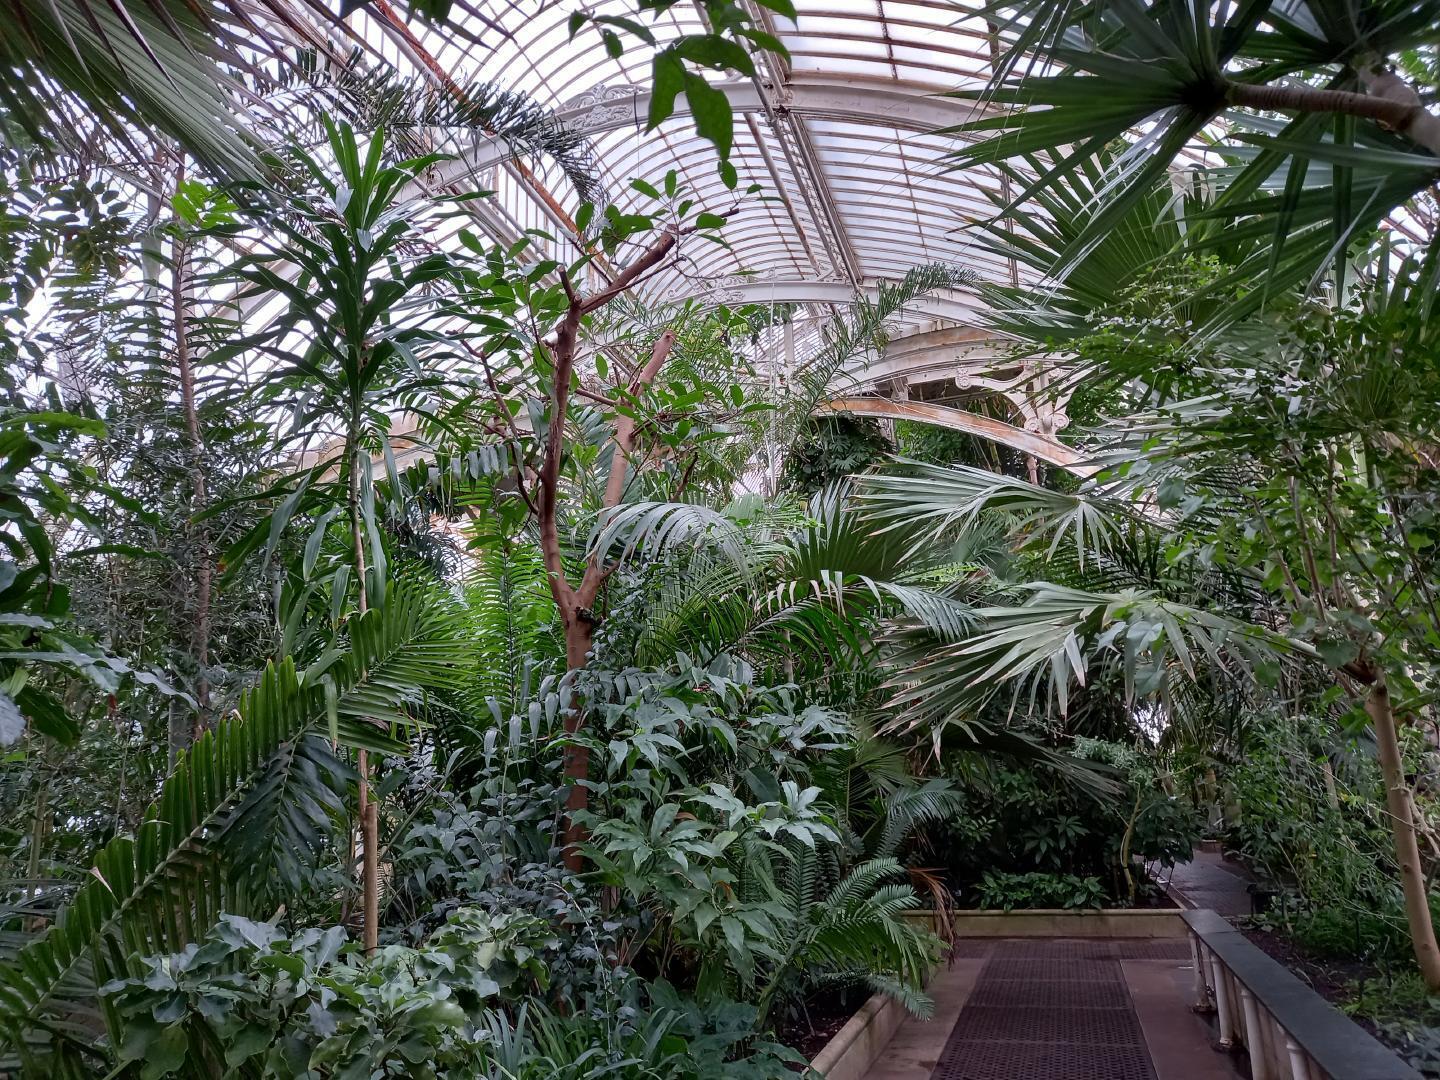 Some plants in the Palm House